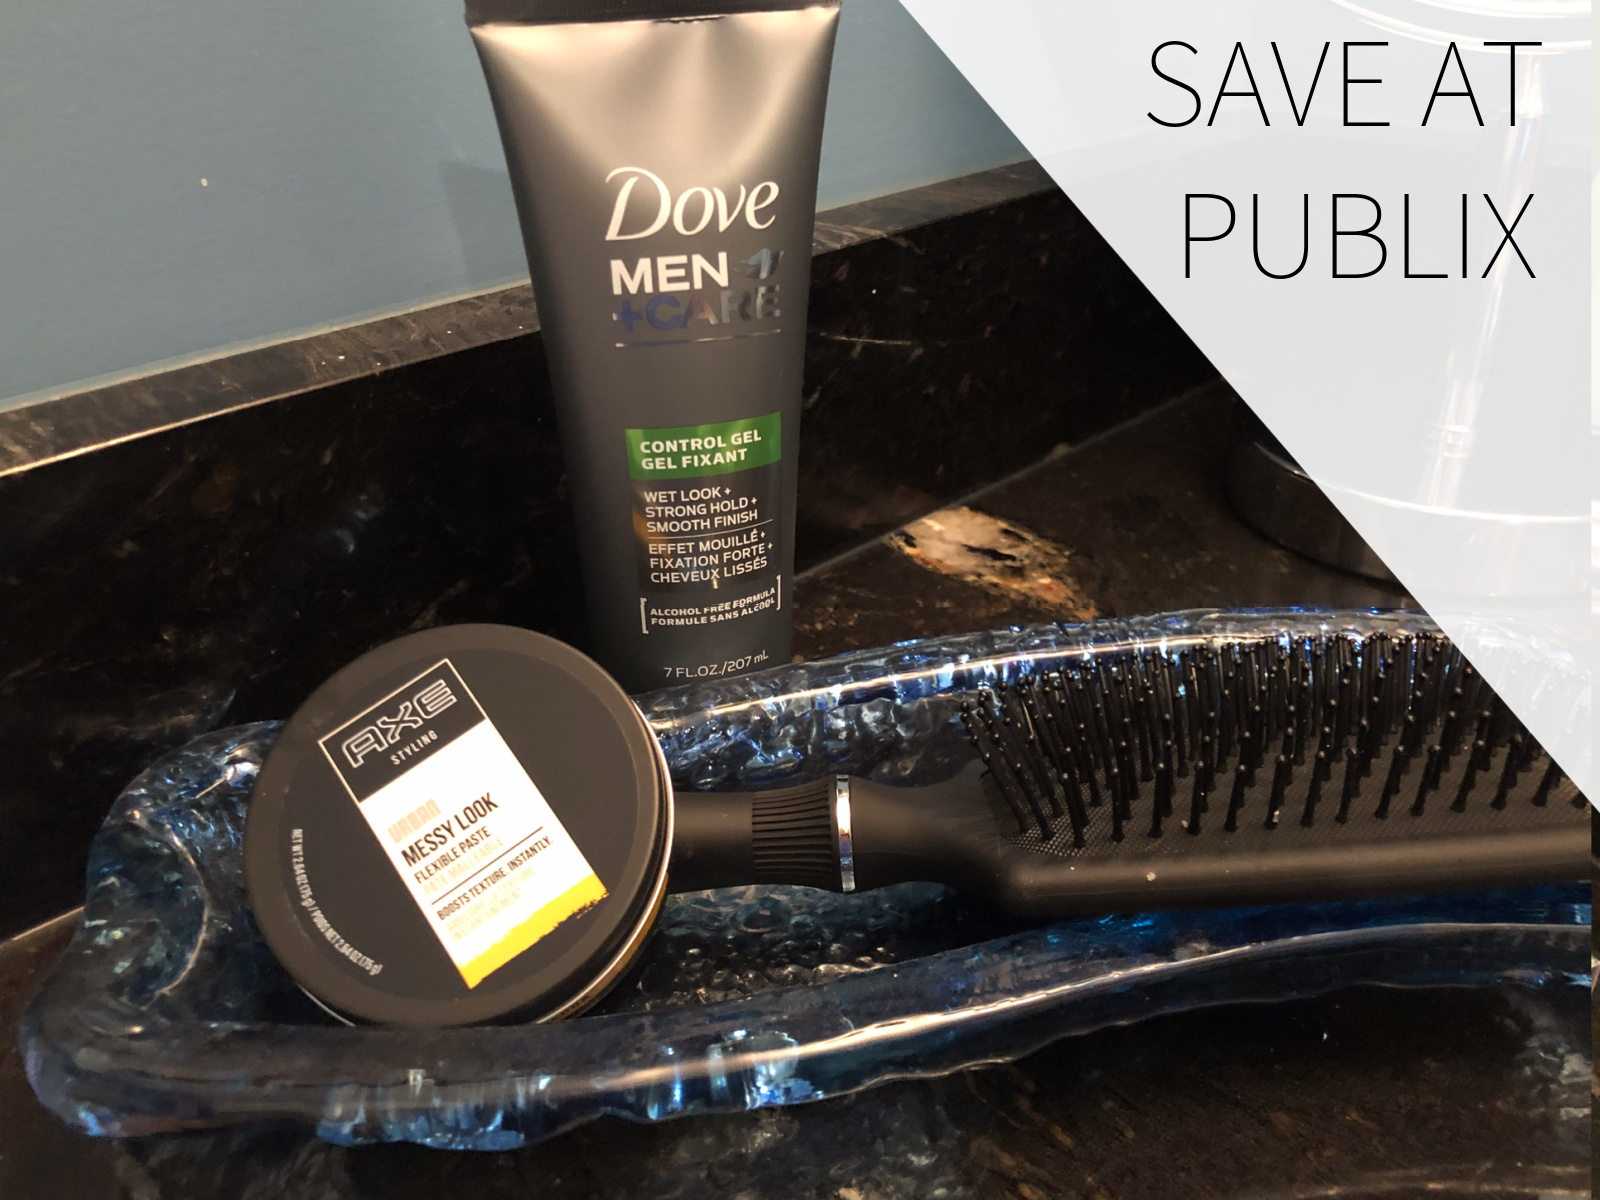 Great Deals On Your Favorite Unilever Personal Care Products - Save Now And Have Handy When You Need Them! on I Heart Publix